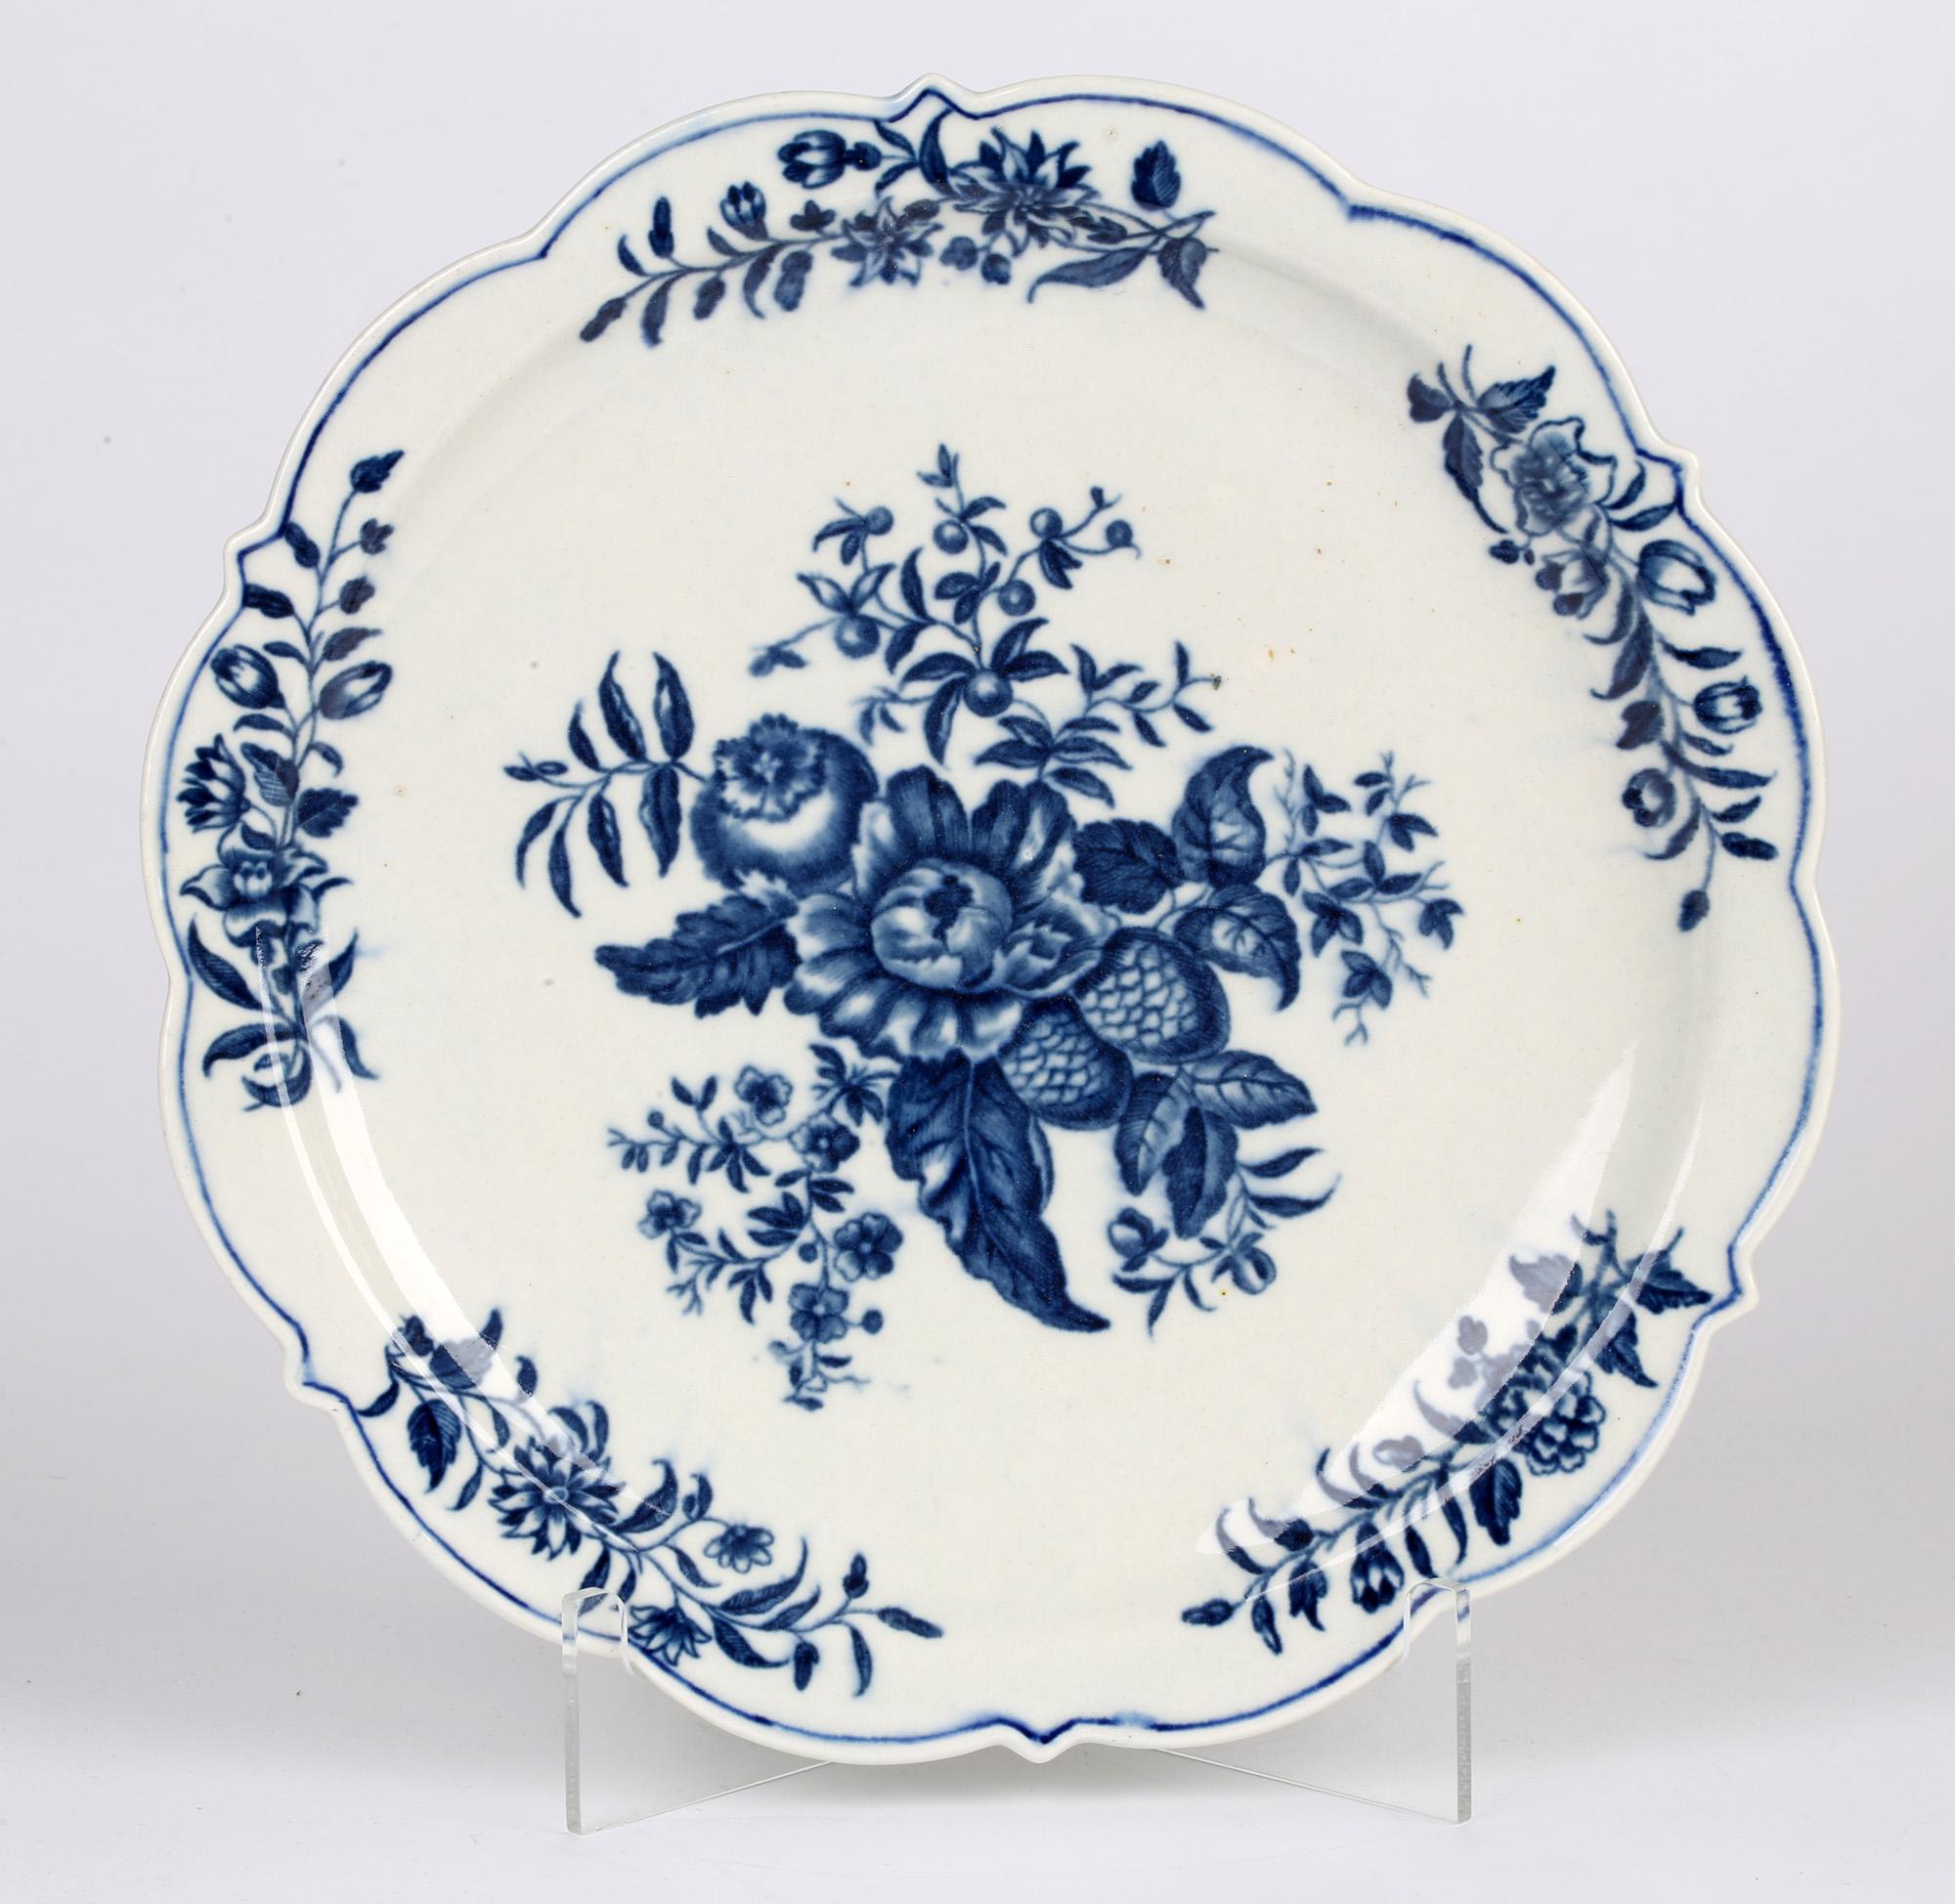 Worcester Early Dr Wall Period Pine Cone Porcelain Plate, circa 1760 4